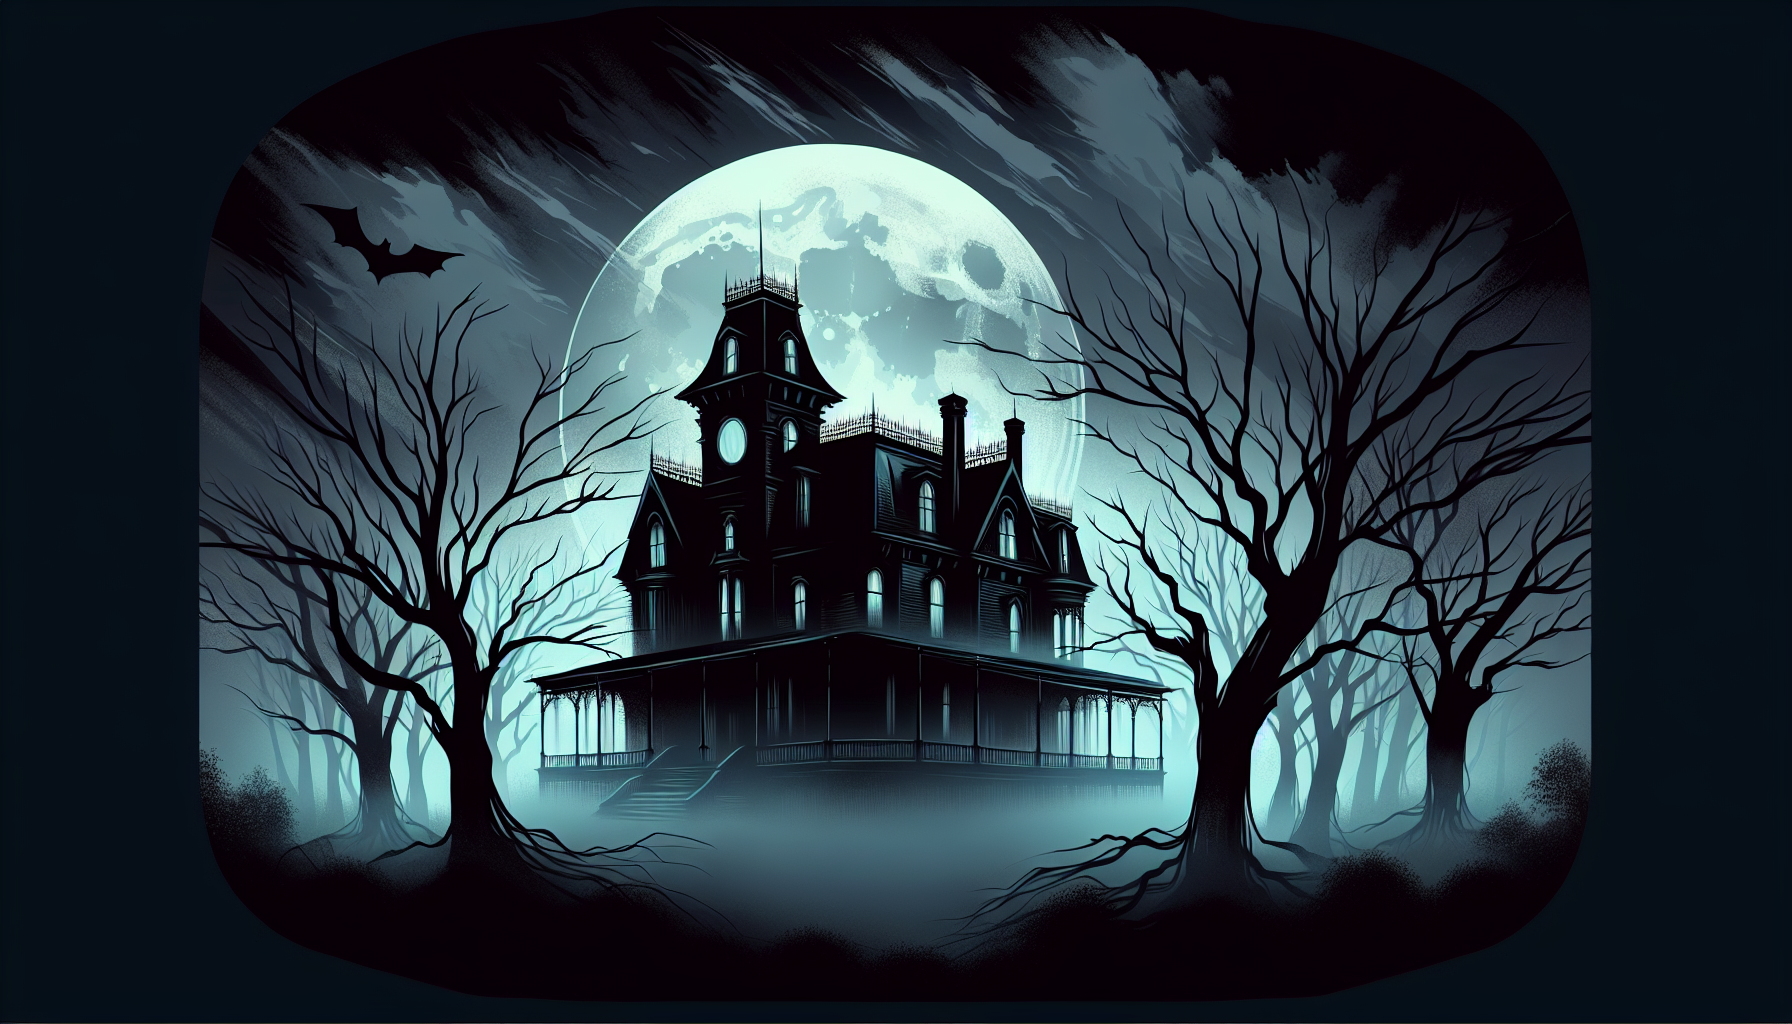 An eerie, fog-covered Victorian mansion at dusk, with silhouettes of bare trees and an ominous full moon, subtly illuminating the scene with a ghostly glow, creating a sense of foreboding and isolatio